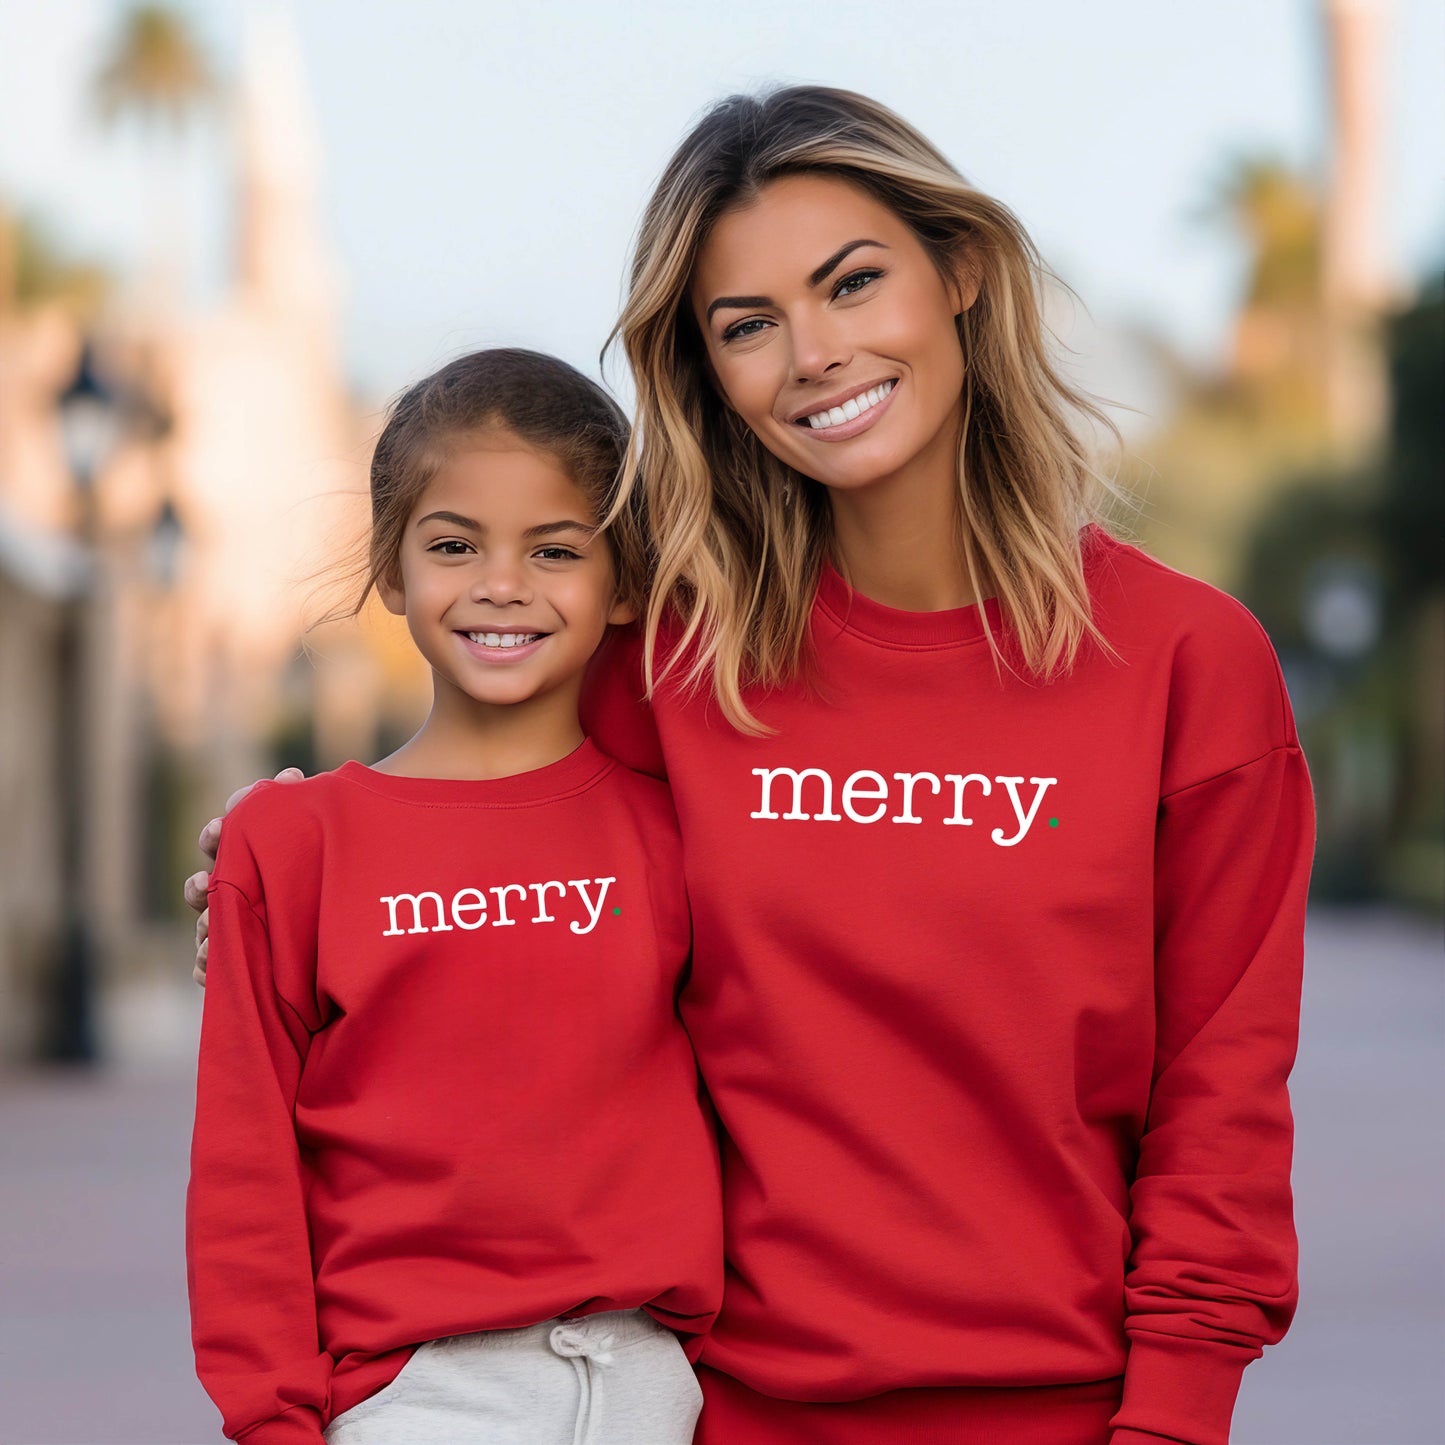 Merry. Sweatshirt- Red (Youth + Adult)